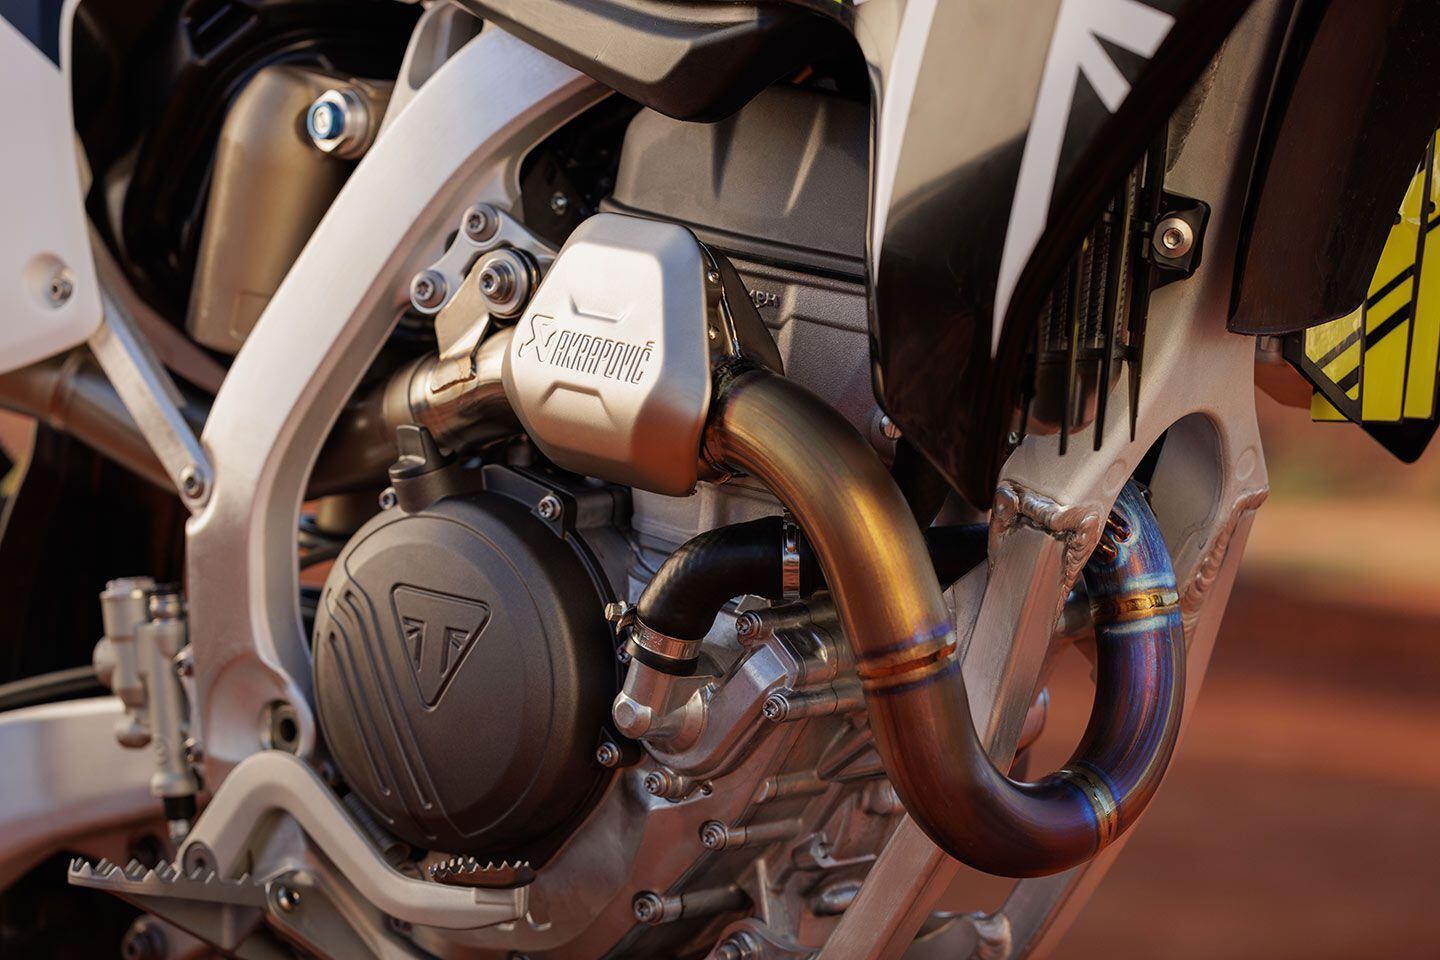 The new 250cc single has aluminum pistons, magnesium covers, titanium valves, and low-friction coatings.